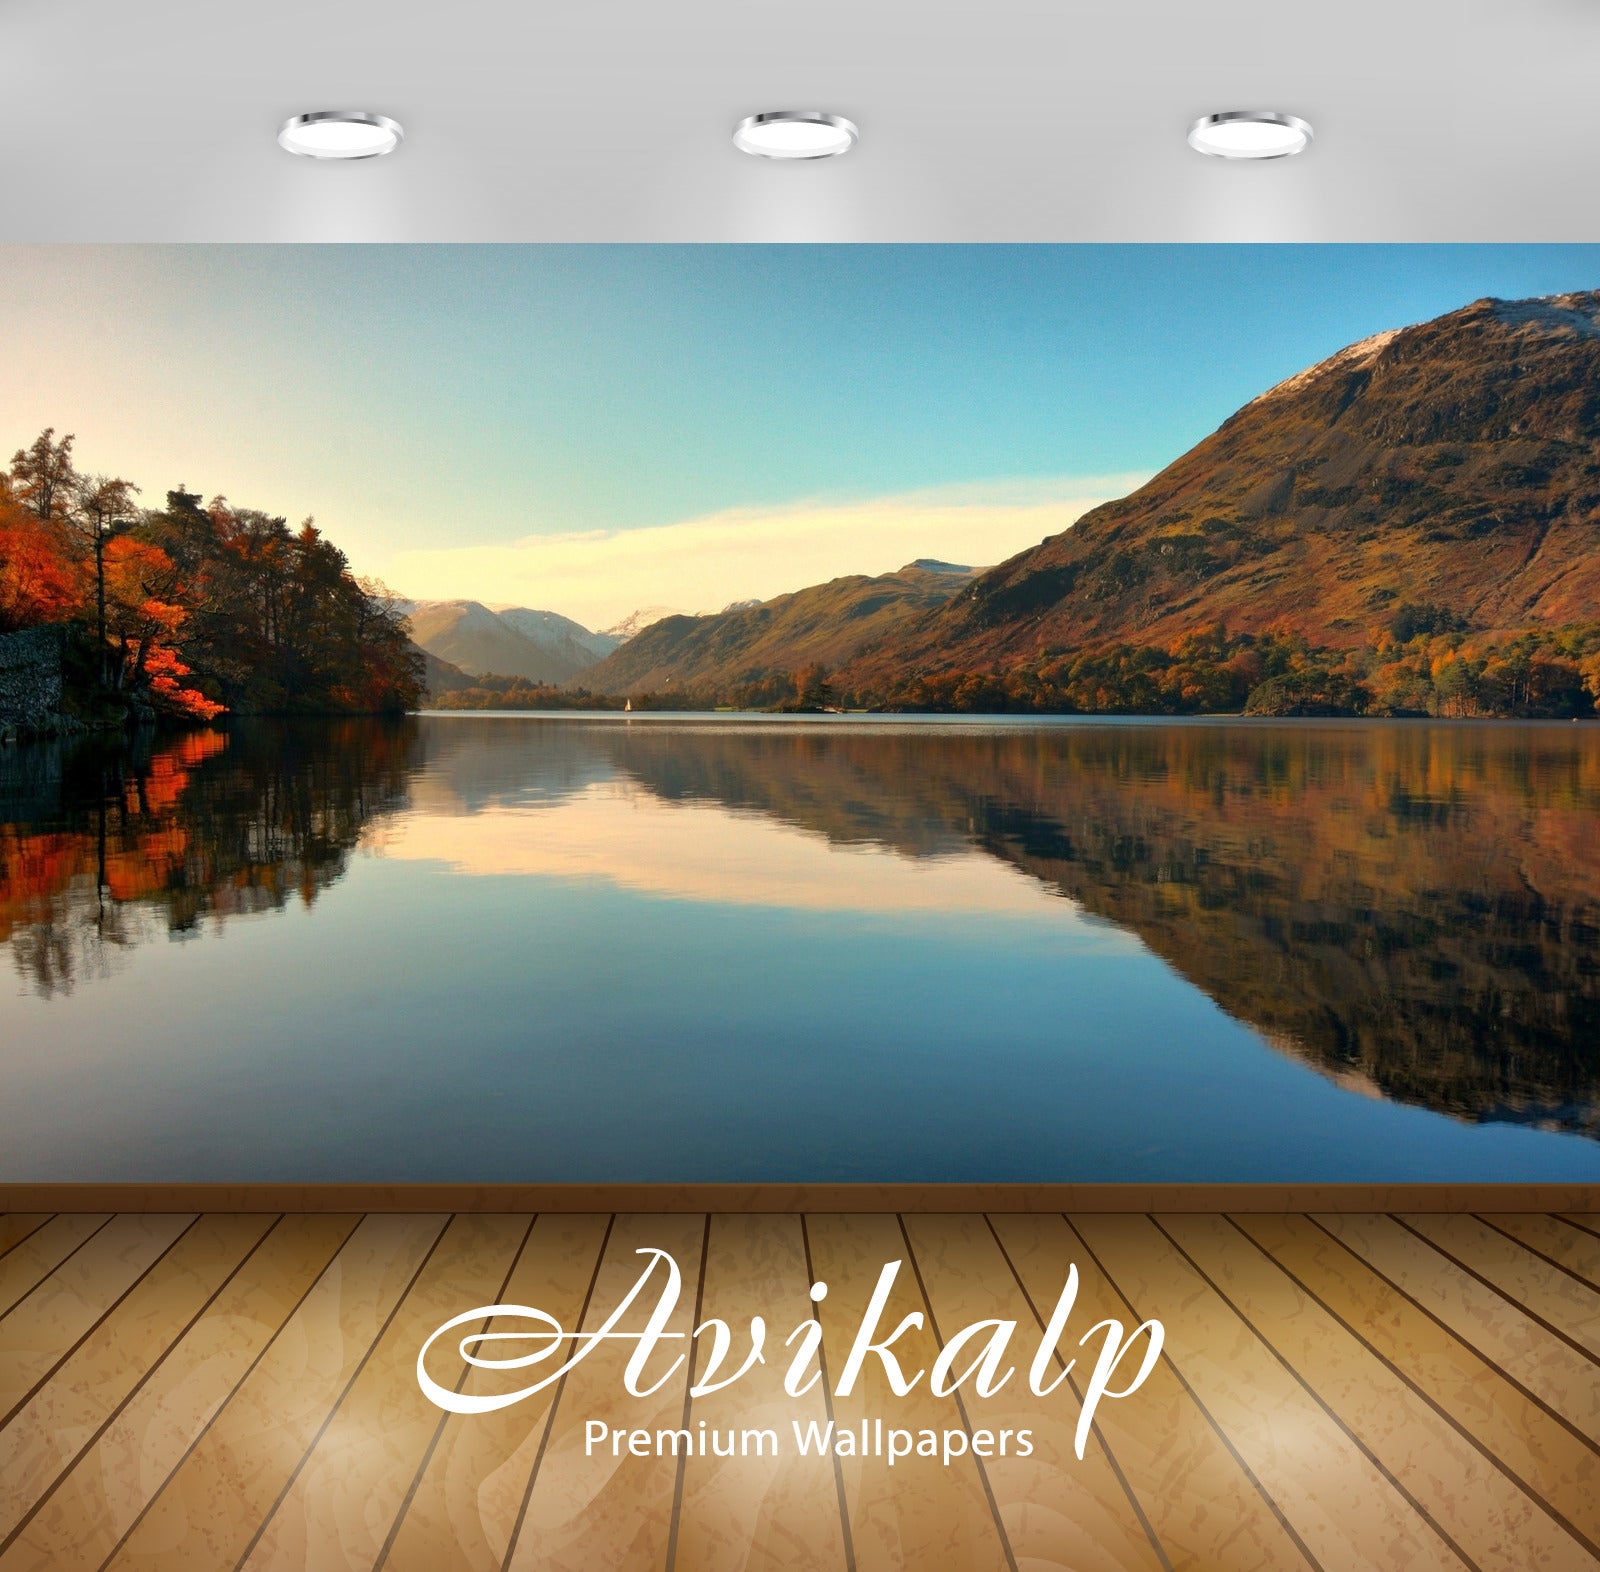 Avikalp Exclusive Awi5116 Autumn By The Lake Nature Full HD Wallpapers for Living room, Hall, Kids R